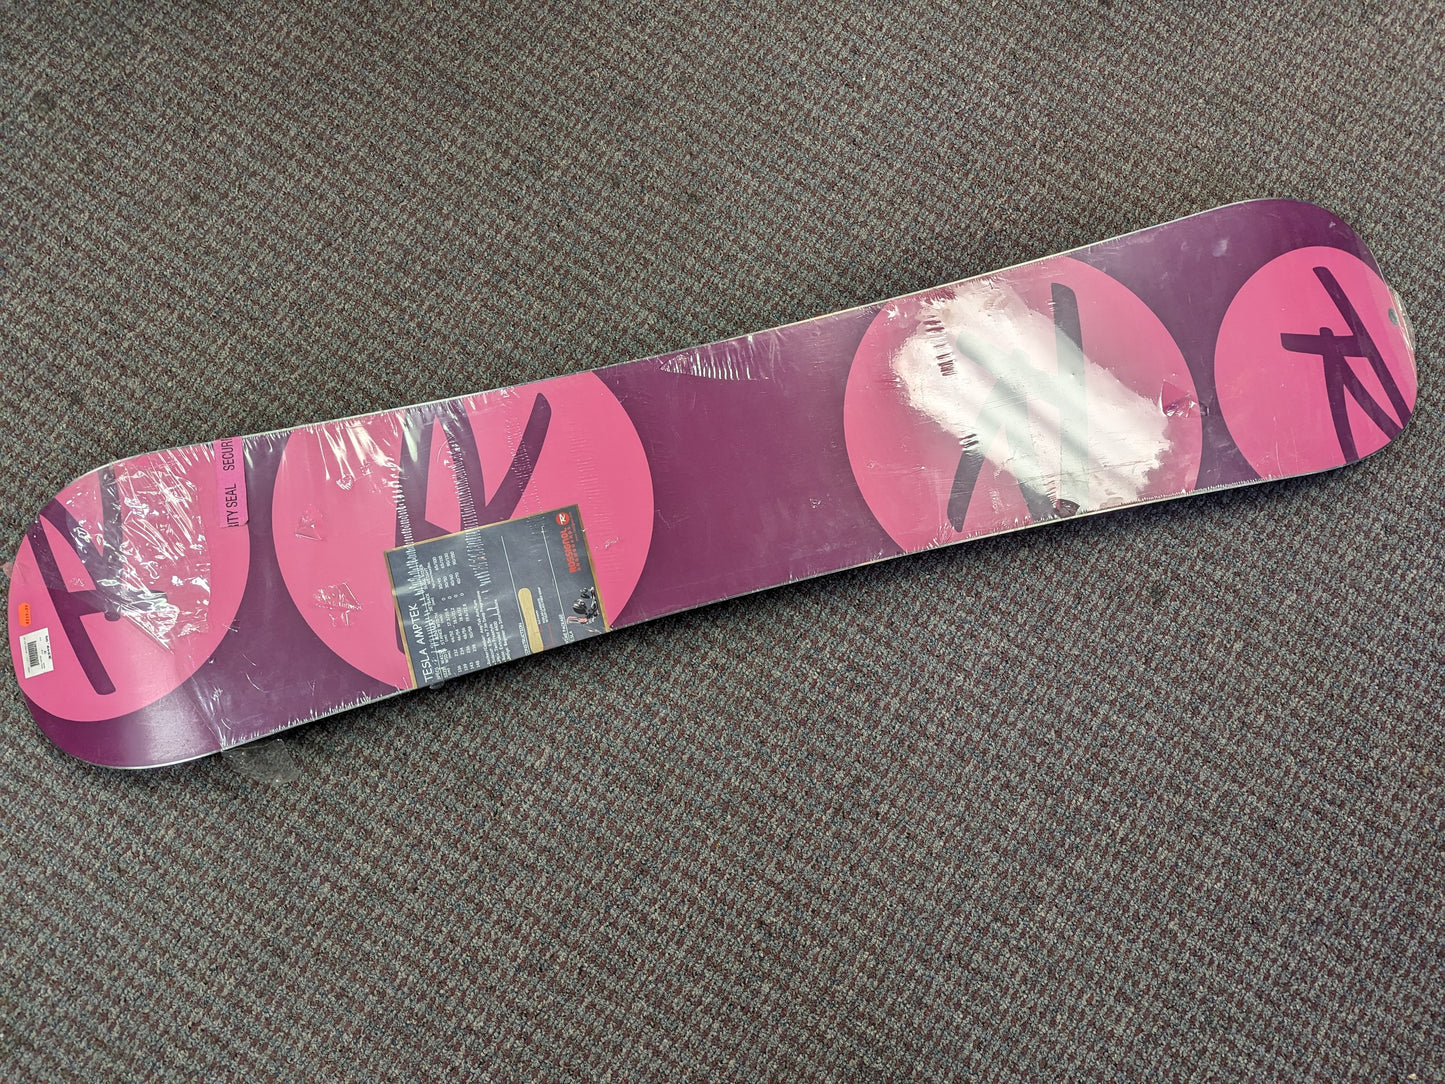 Rossignol Tesla Ampte Snowboard  *Deck Only*No Bindings* Size 139 Cm Color Purple Condition New with Tags